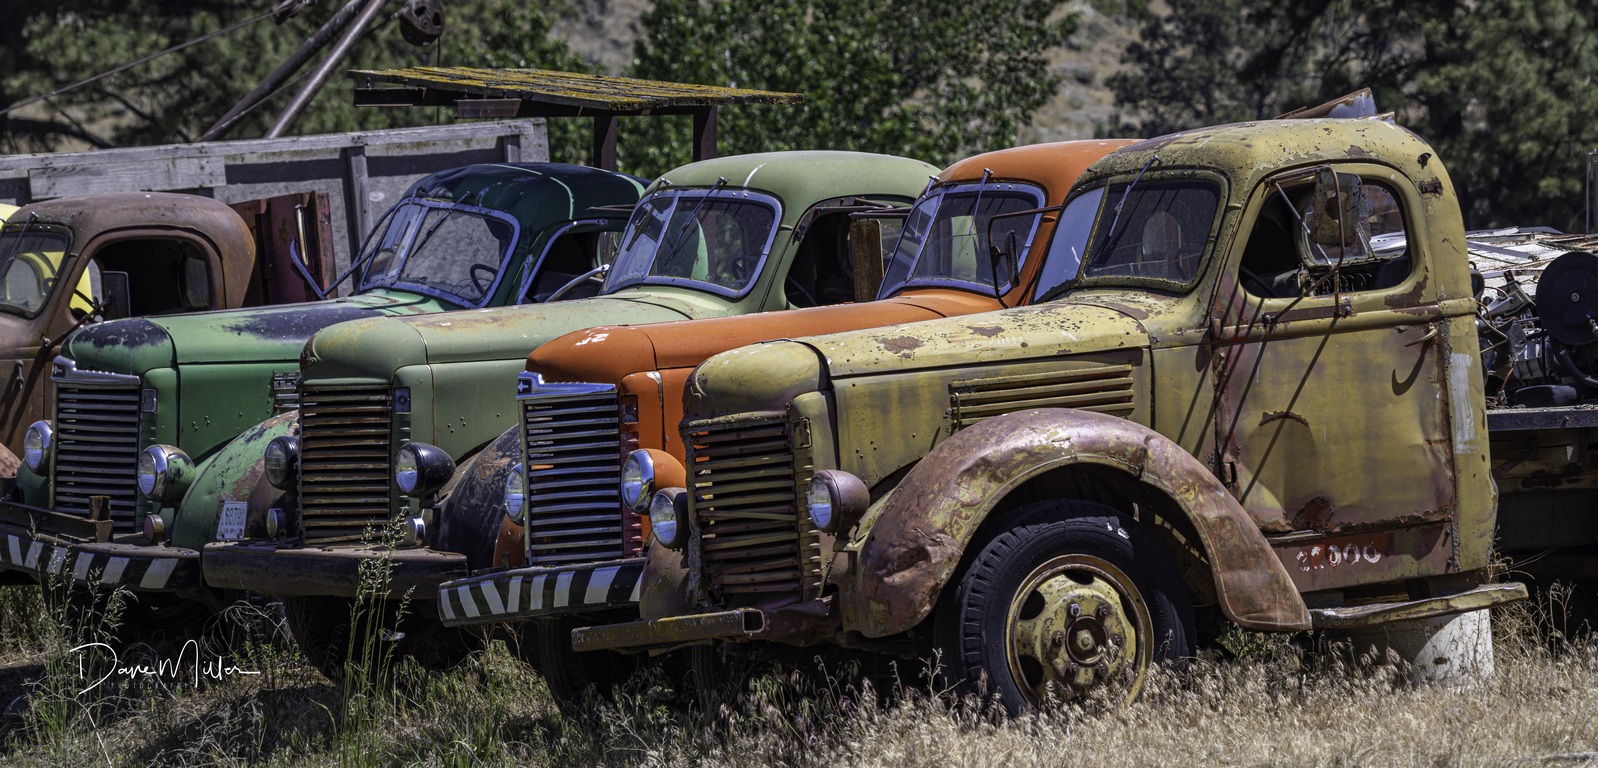 Image of Almota Road Trucks by Dave Miller